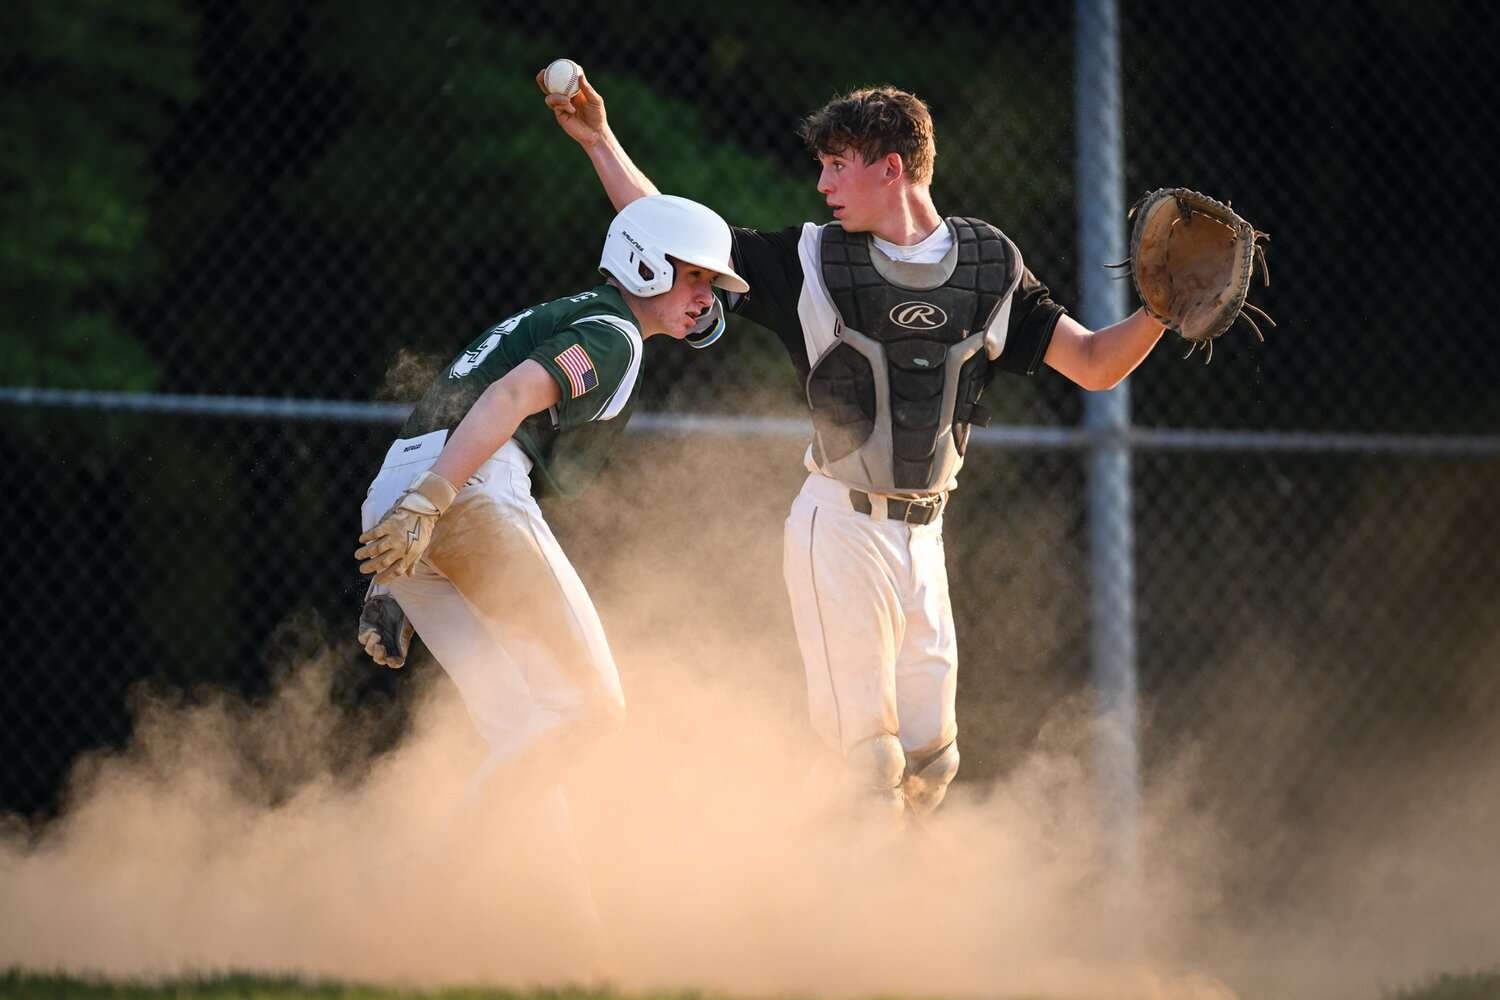 Hatfield-Towamencin catcher Mason Scovronski shows the ball after Pennridge’s Anthony Diamente tries to score from second base in the second inning.